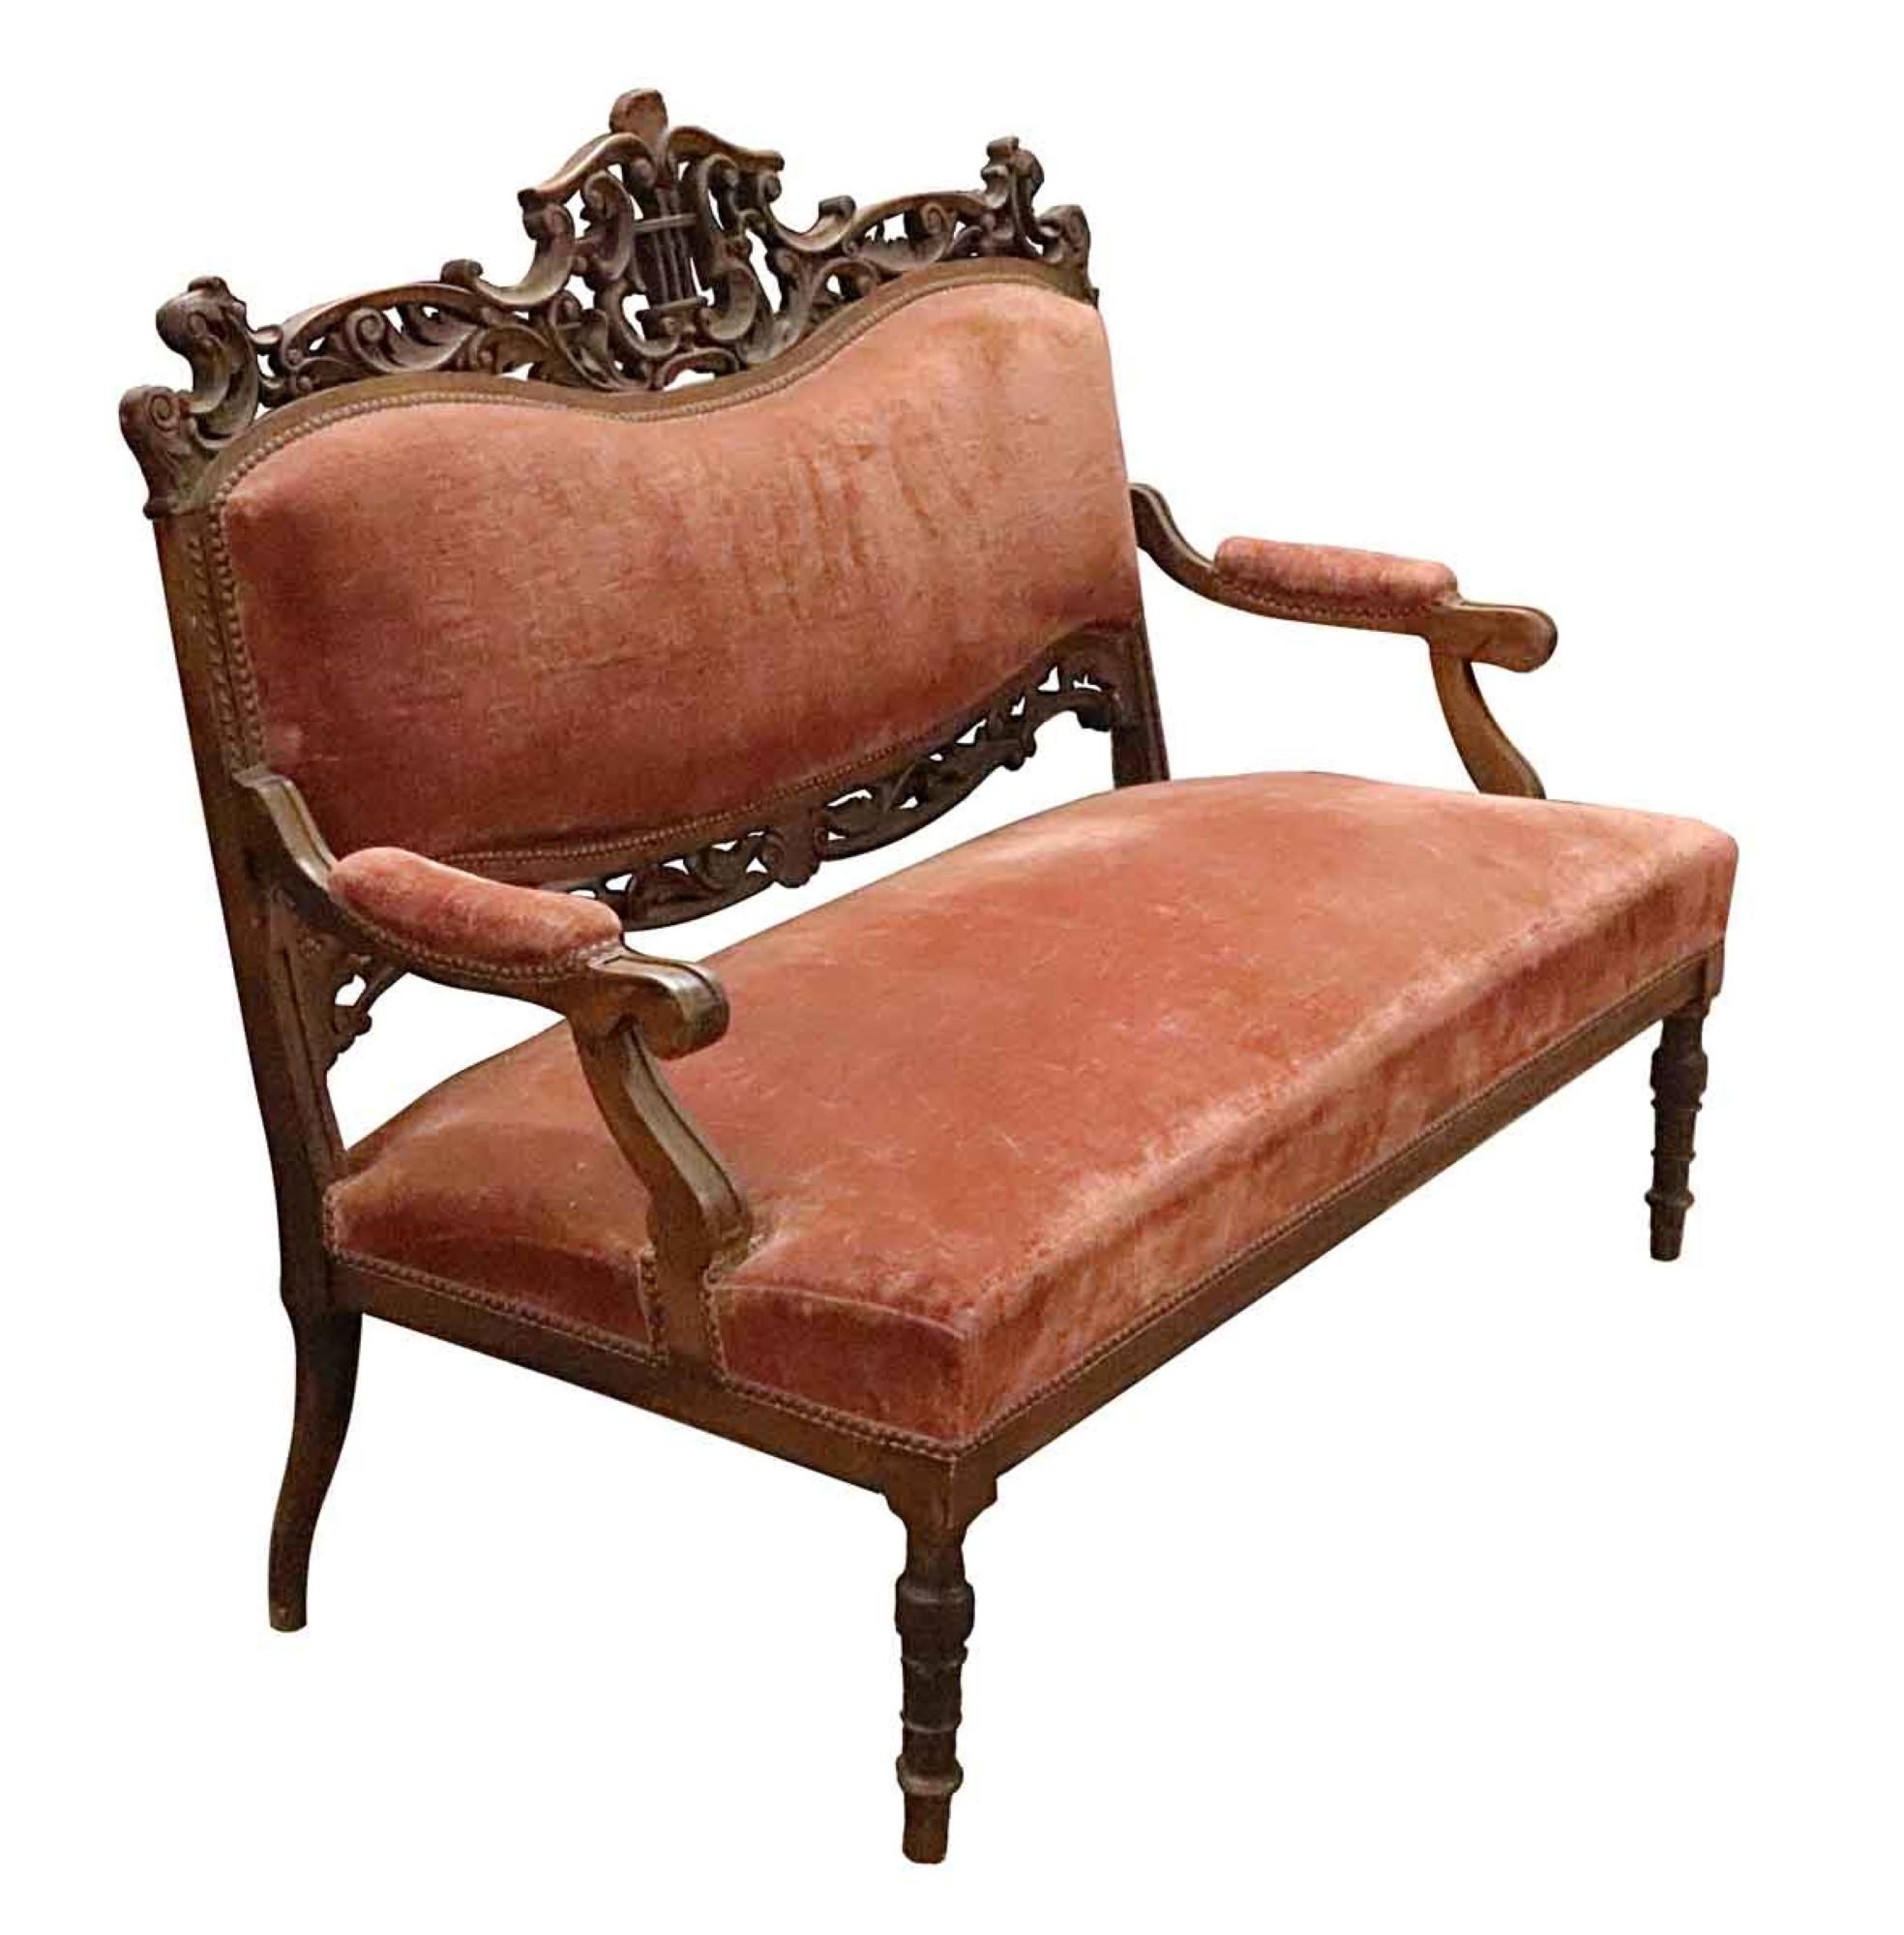 1890s Victorian red velvet love seat from France. The frame is heavily carved and made of walnut or oak with a musical motif.